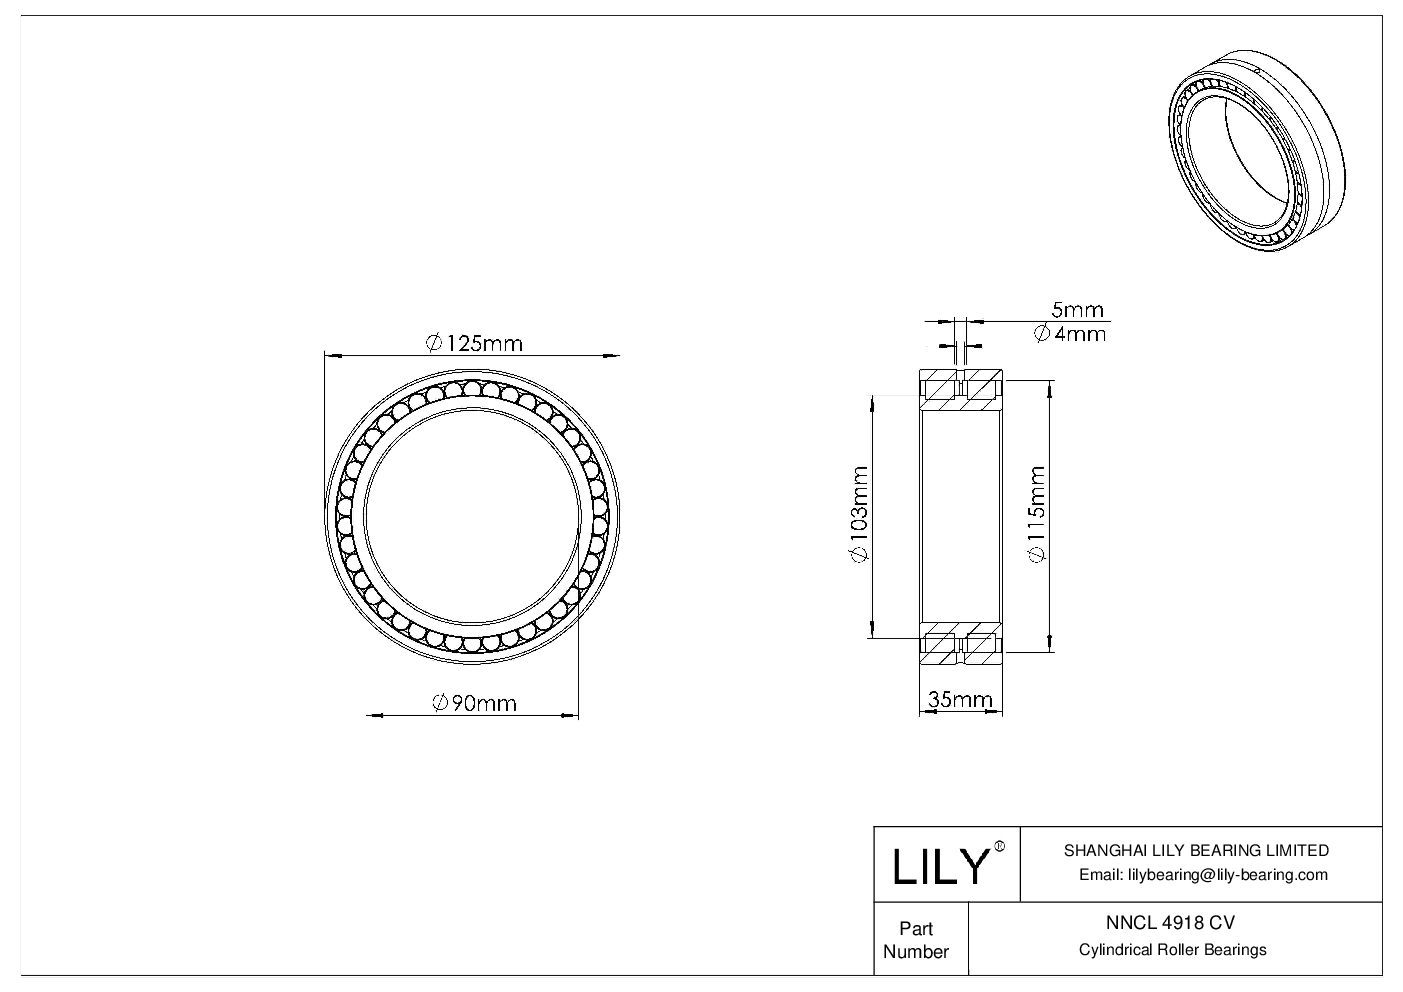 NNCL 4918 CV Double Row Full Complement Cylindrical Roller Bearings cad drawing